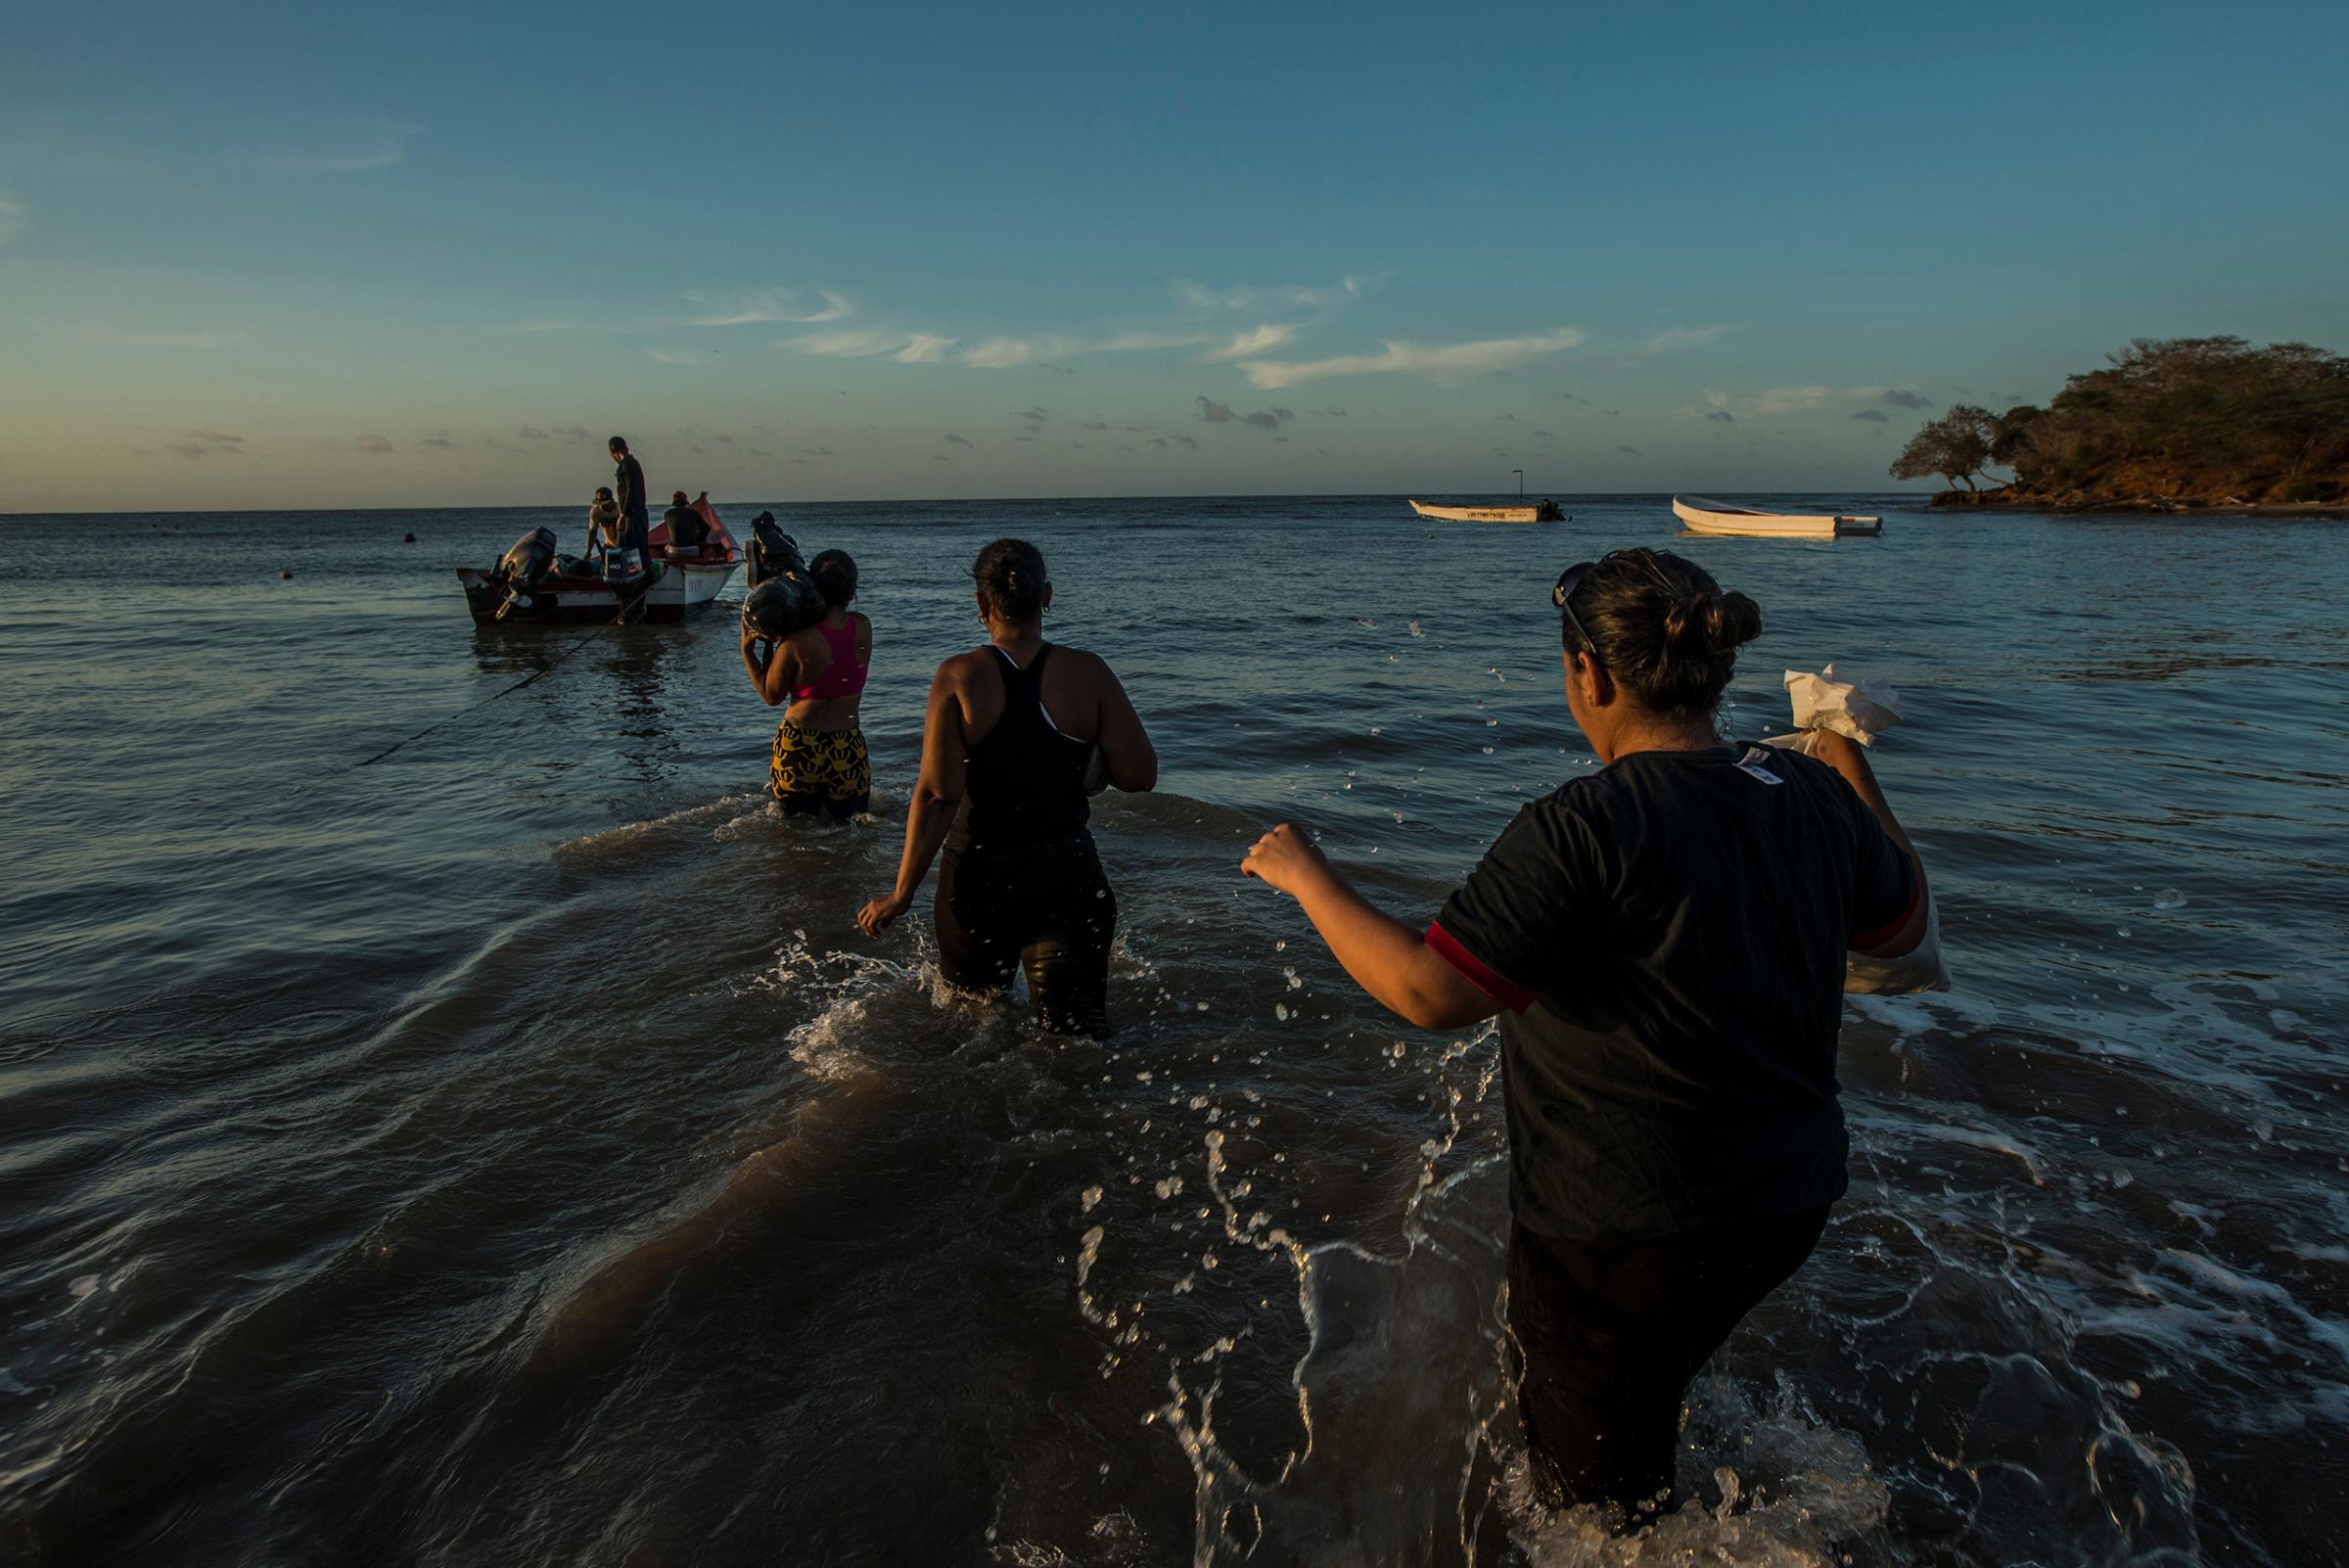 Migrants board a smuggler's boat that will take them to the Caribbean island of Curacao on Sept. 26, 2016. More than 150,000 people have fled the economic collapse in Venezuela in the last year alone, the most in more than a decade, scholars say, with the sea route posing special dangers.